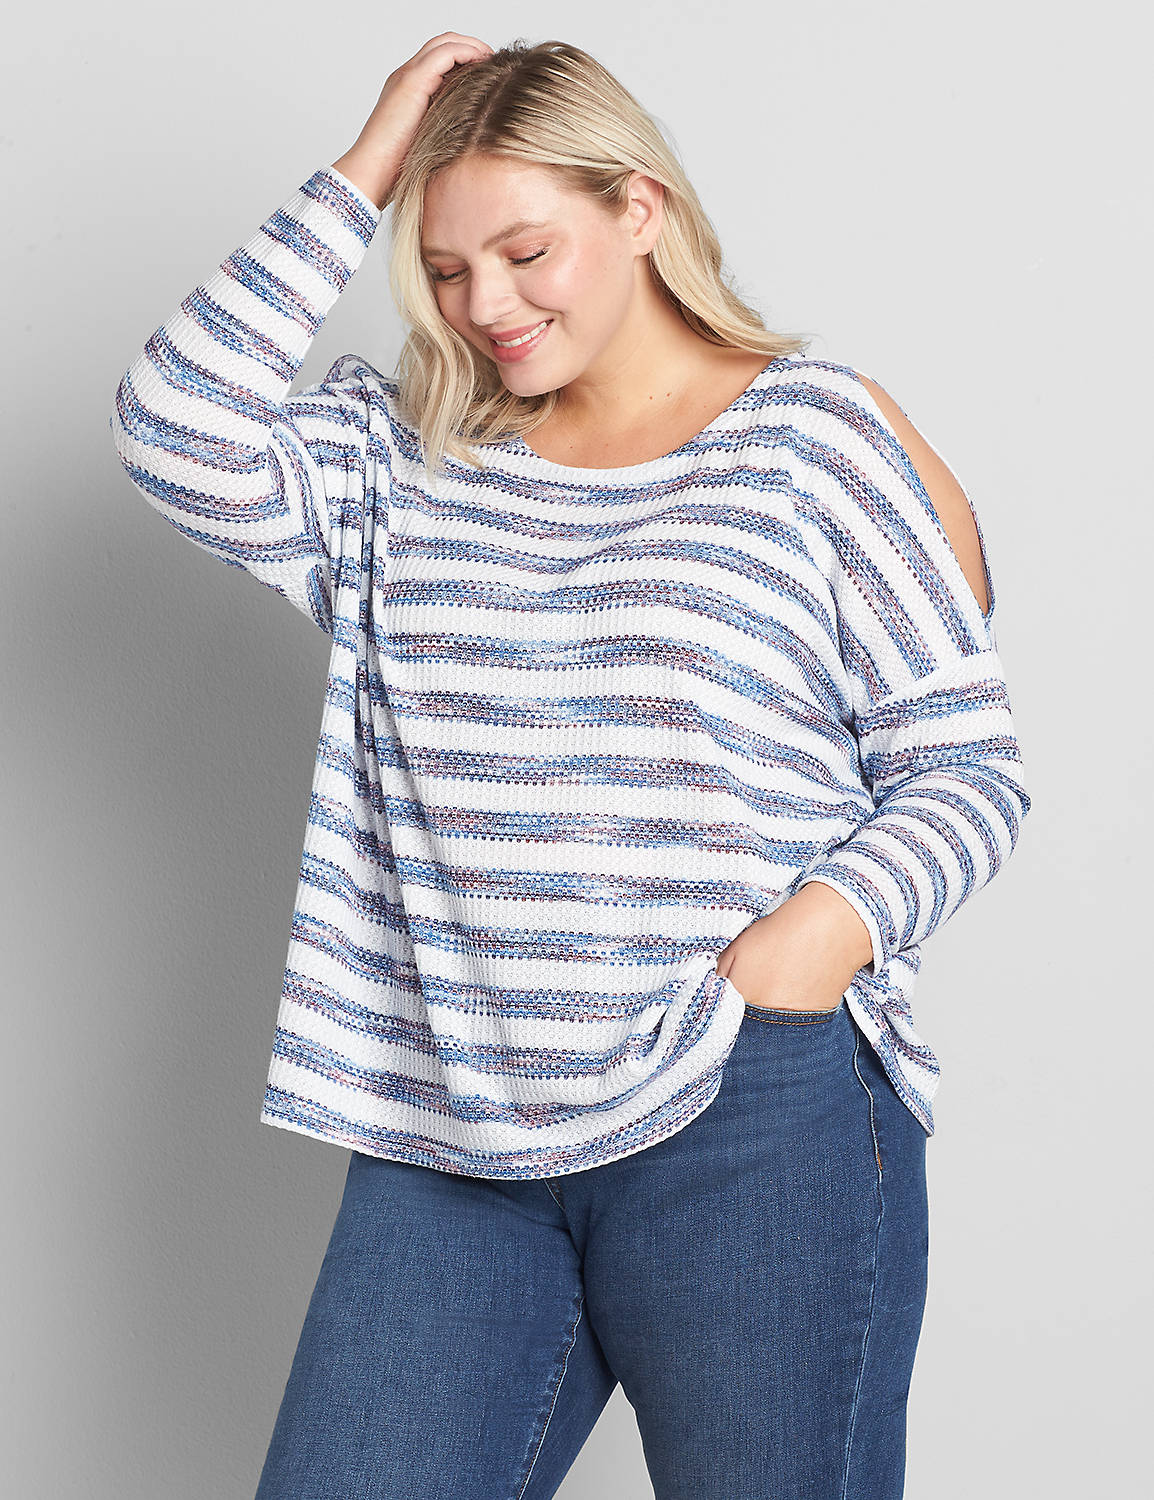 Long Sleeve Open Crew Neck With Cutout Shoulders In Space Dye Stripe:Stripe:10/12 Product Image 1